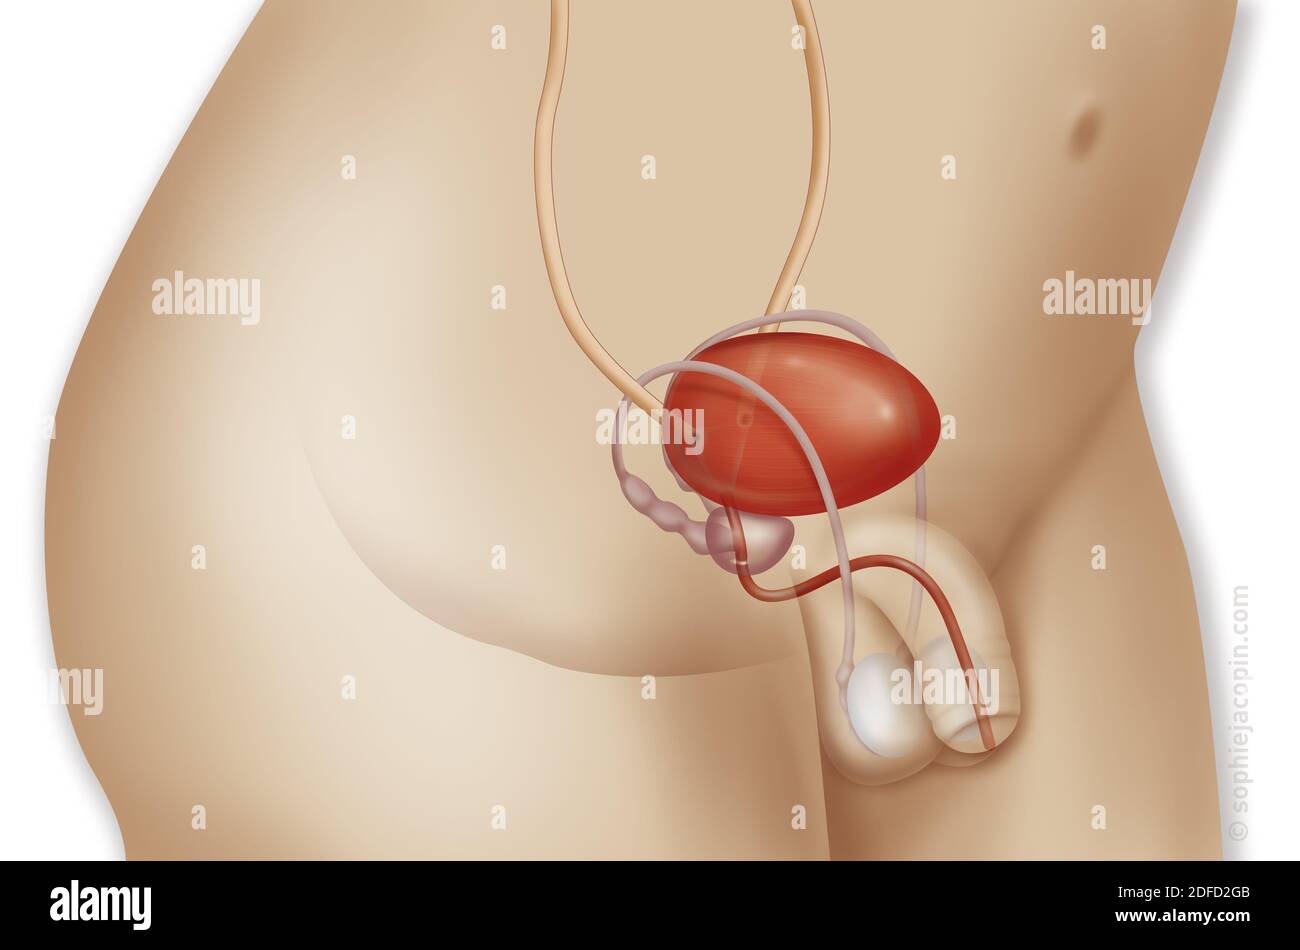 The bladder and its relationship in the boy Stock Photo